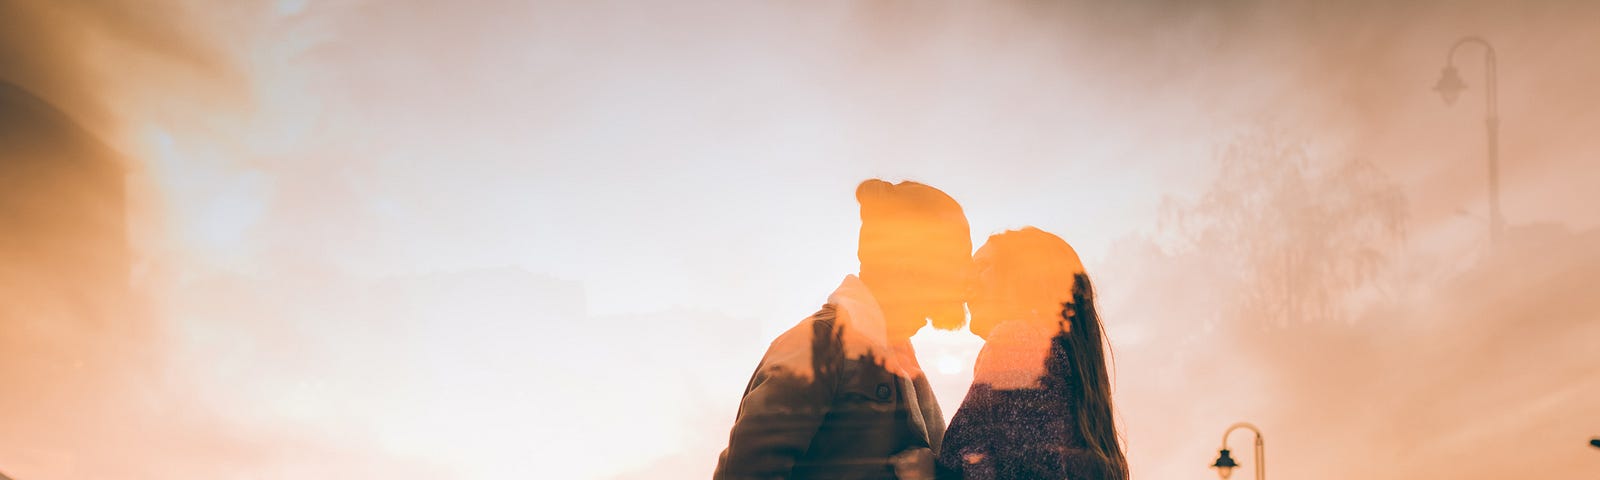 Double exposure orange-filtered photo of a couple kissing against bright sky.